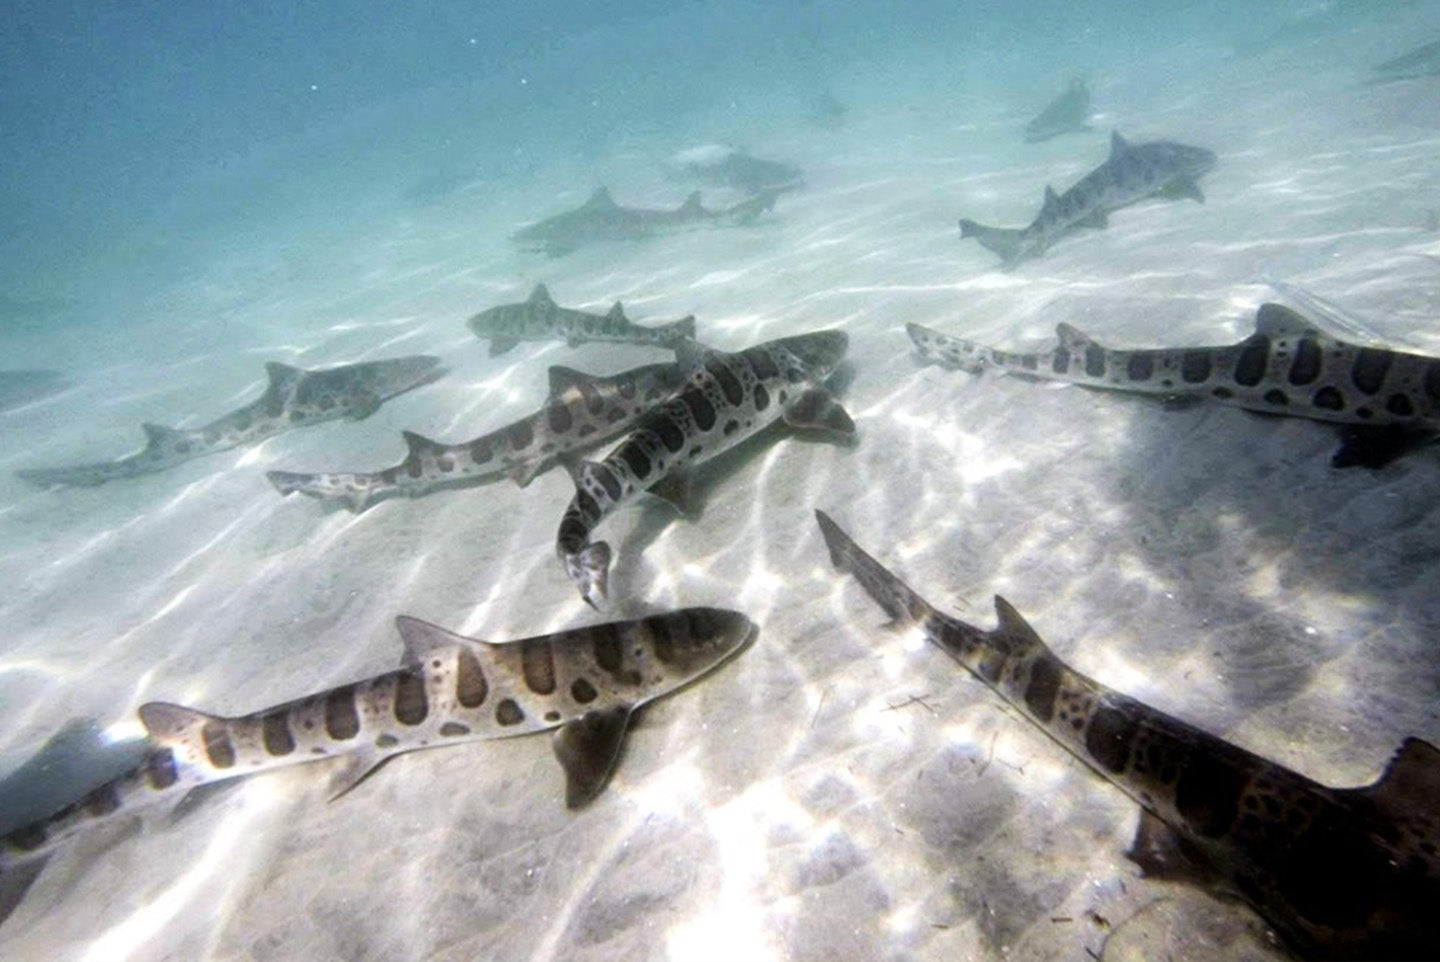 Underwater photo of a group of Leopard Sharks on the sandy bottom of the seafloor, in La Jolla California.